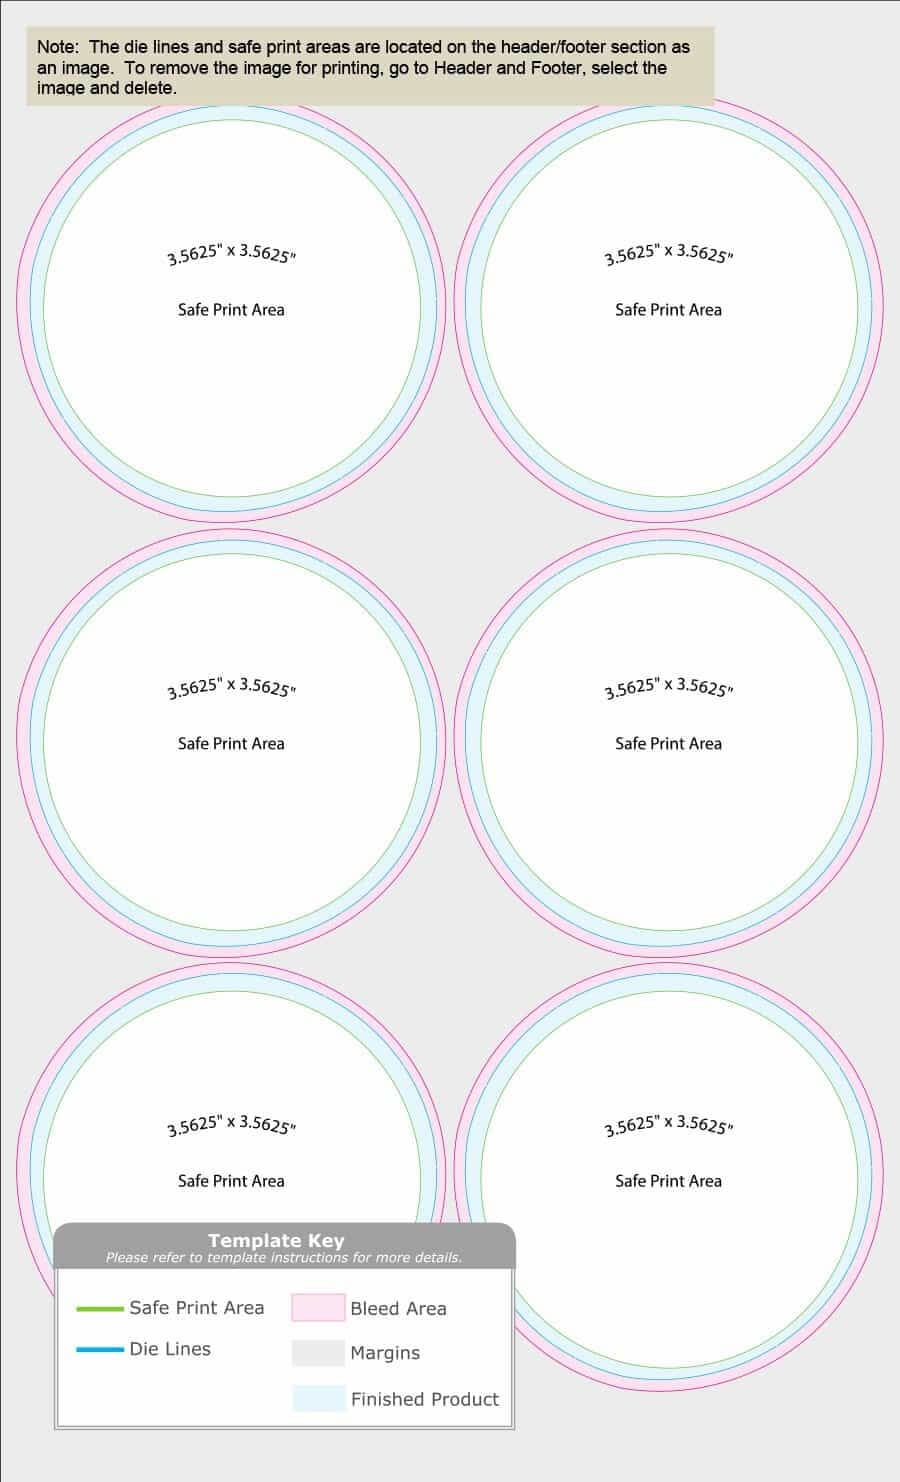 16 Printable Table Tent Templates And Cards ᐅ Template Lab Throughout Tent Name Card Template Word